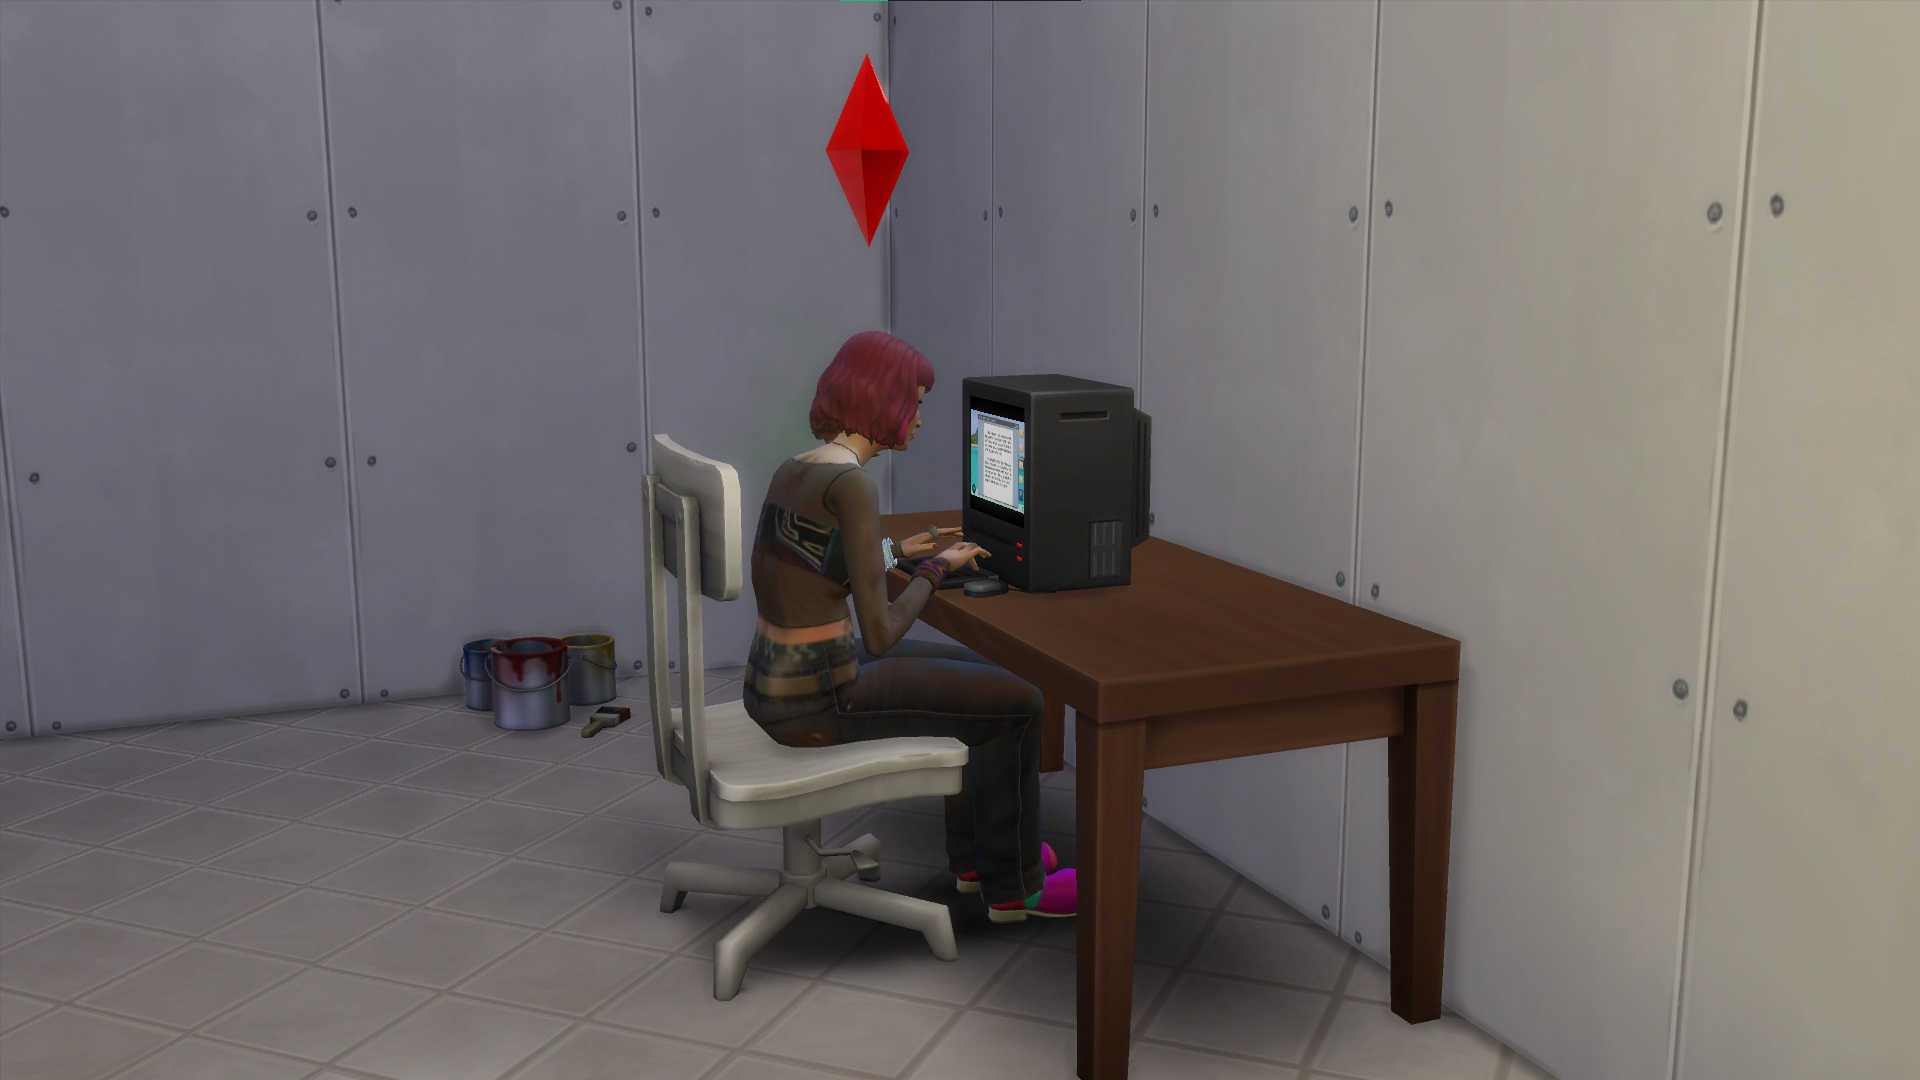 The Sims 4 - a pink haired sim sits at an old computer in an undecorated room